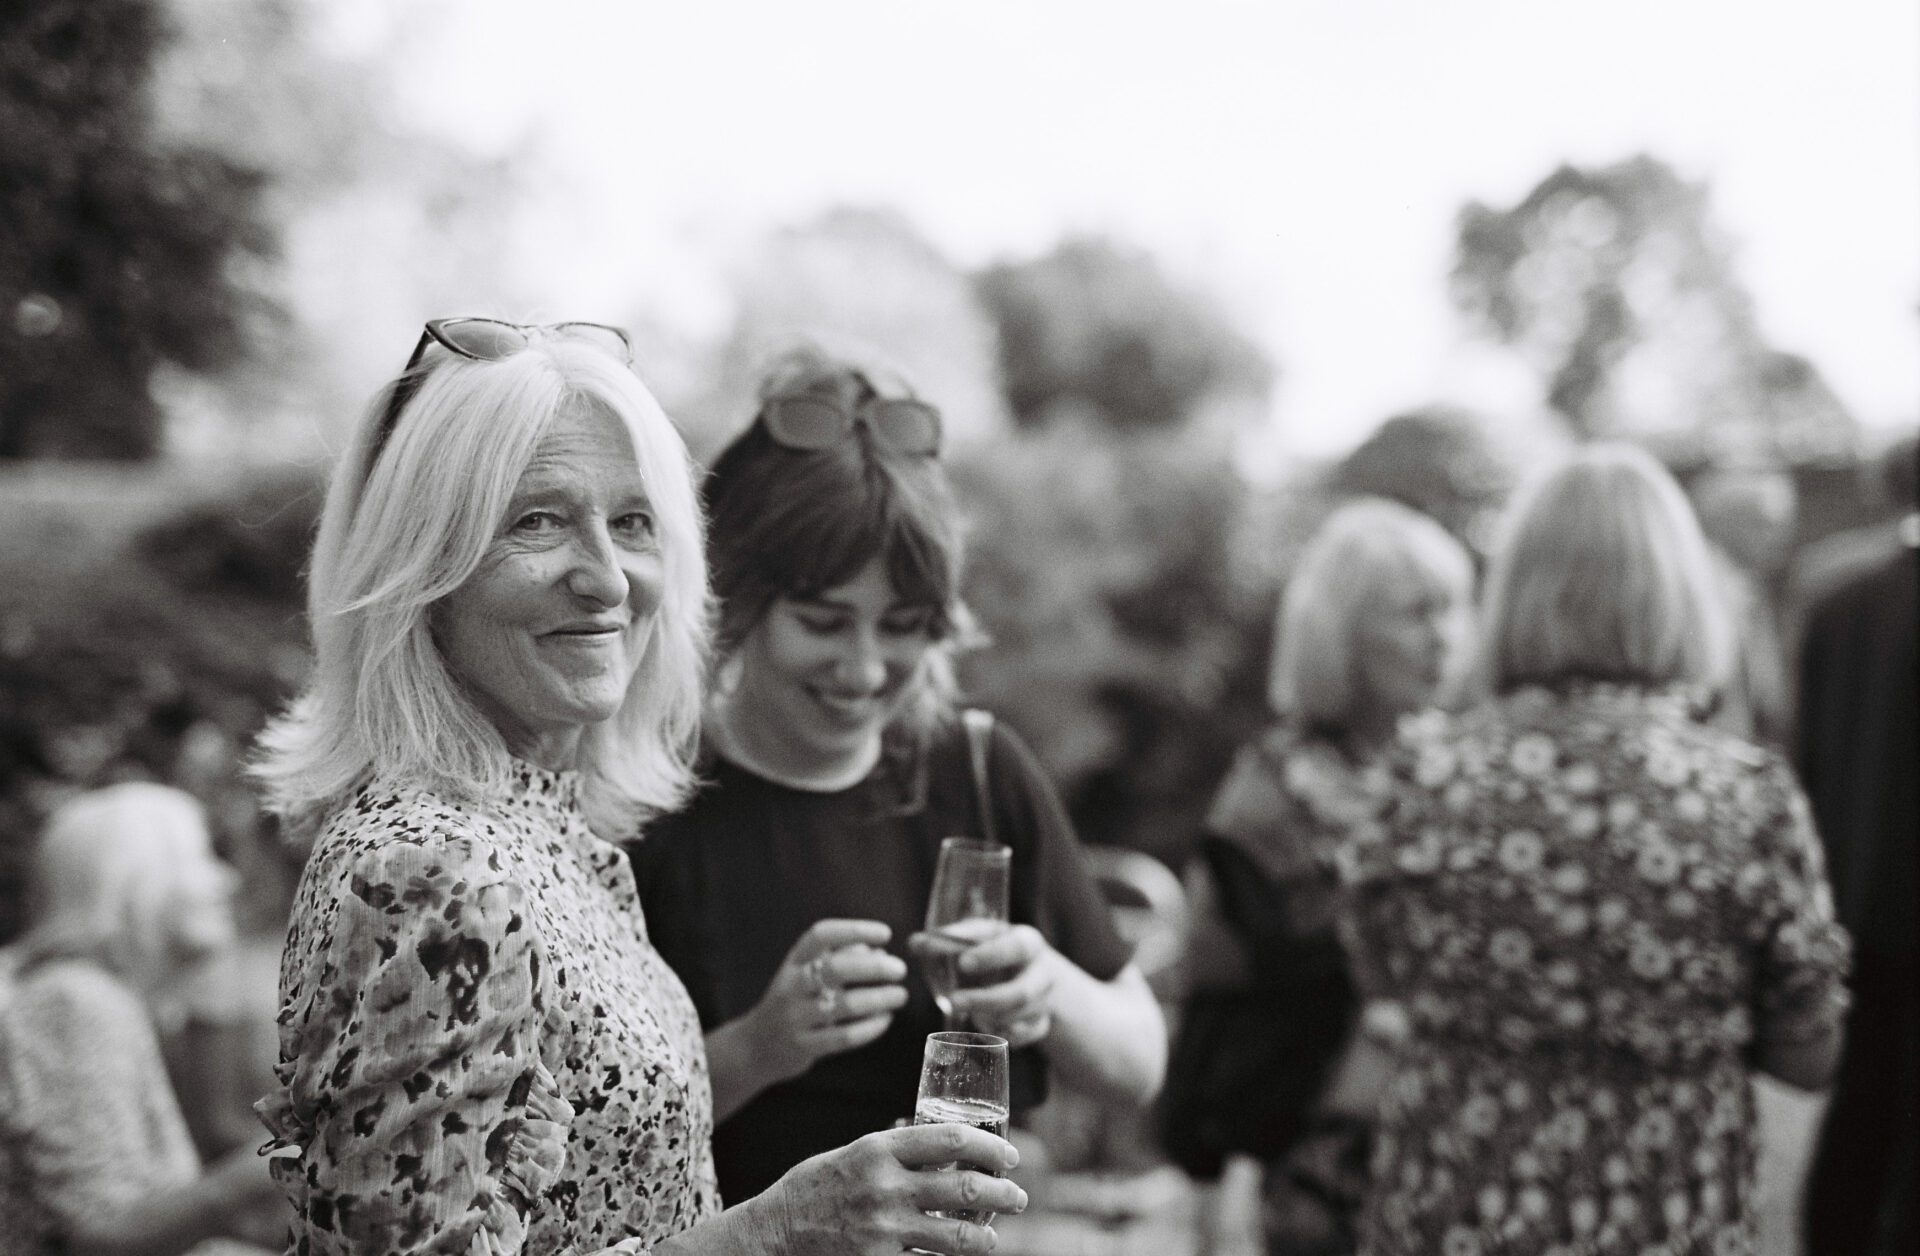 Candid moments during Somerset marquee wedding reception on 35mm film